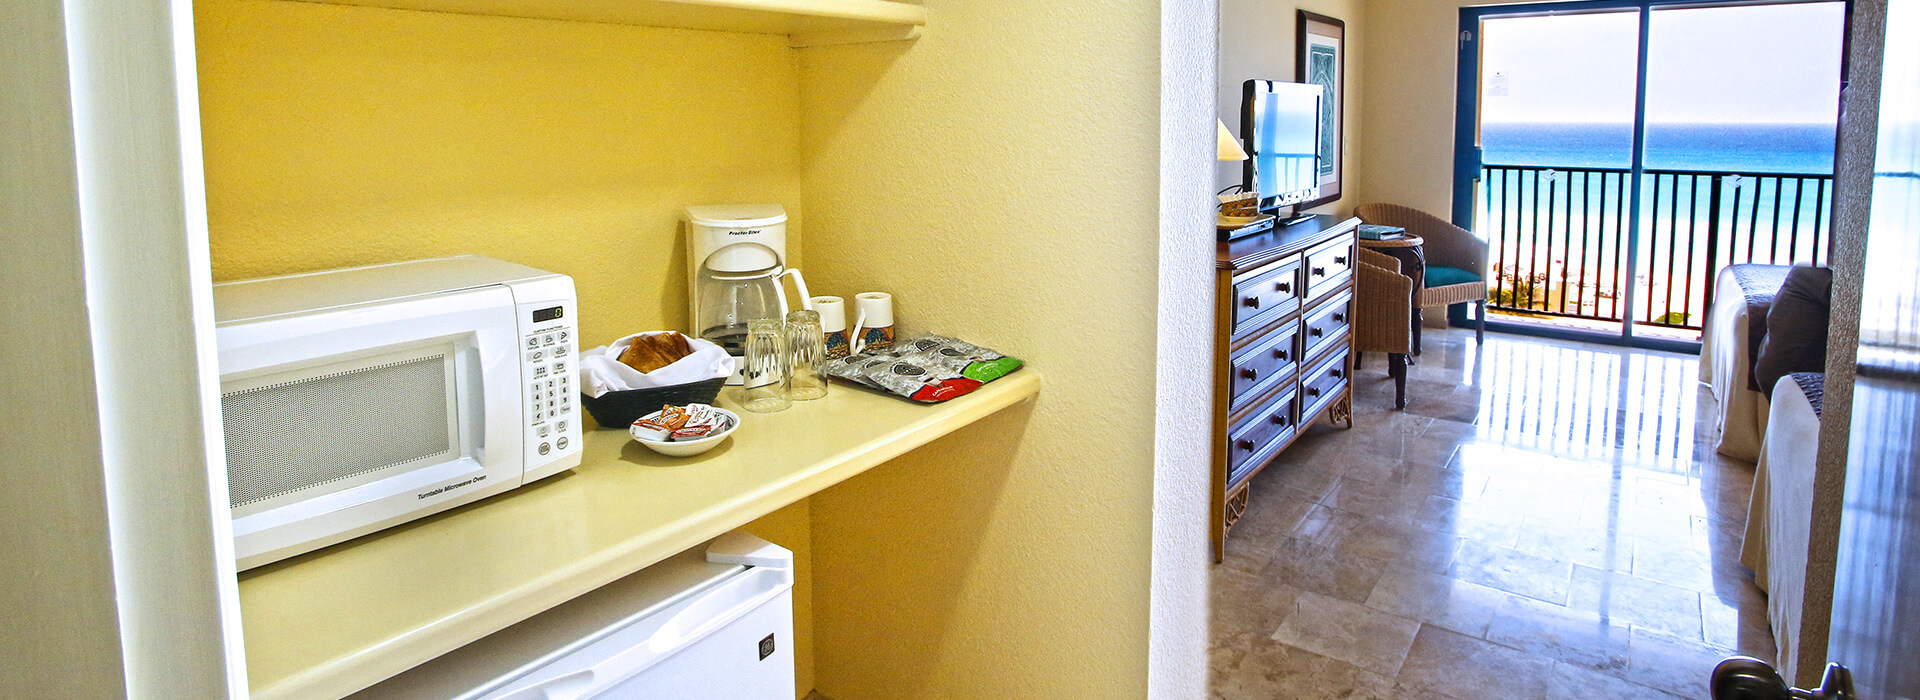 Beachfront Junior Suite fully equipped including kitchen appliances